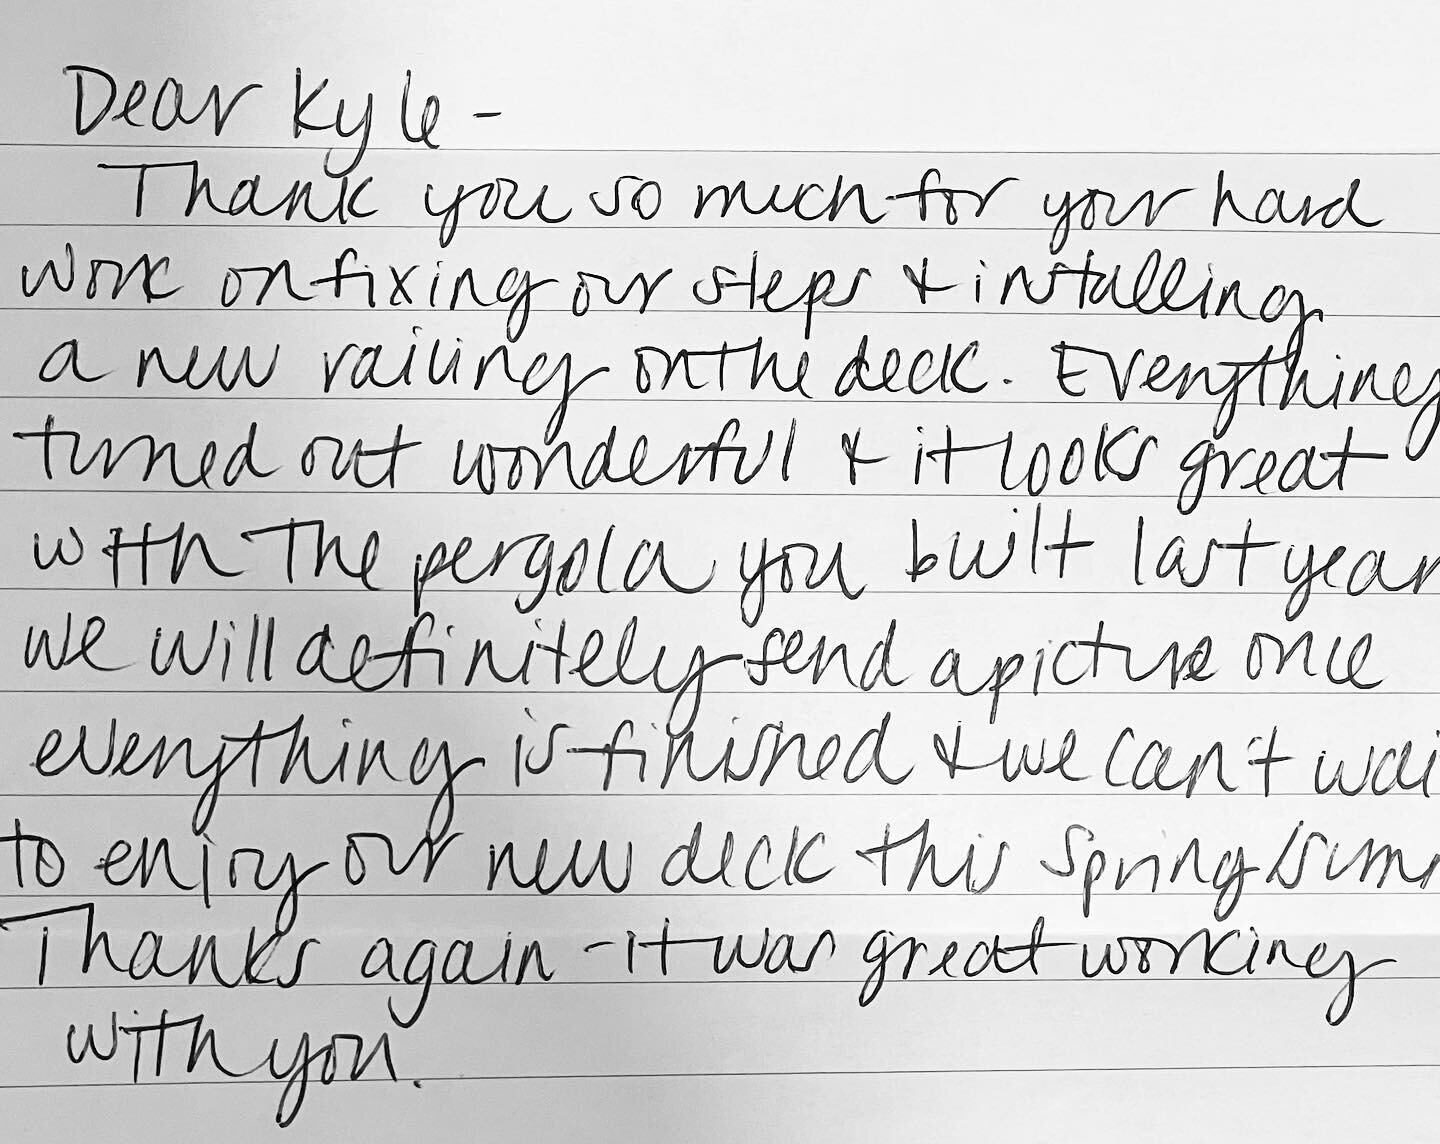 A lovely letter from one of our clients - ✨